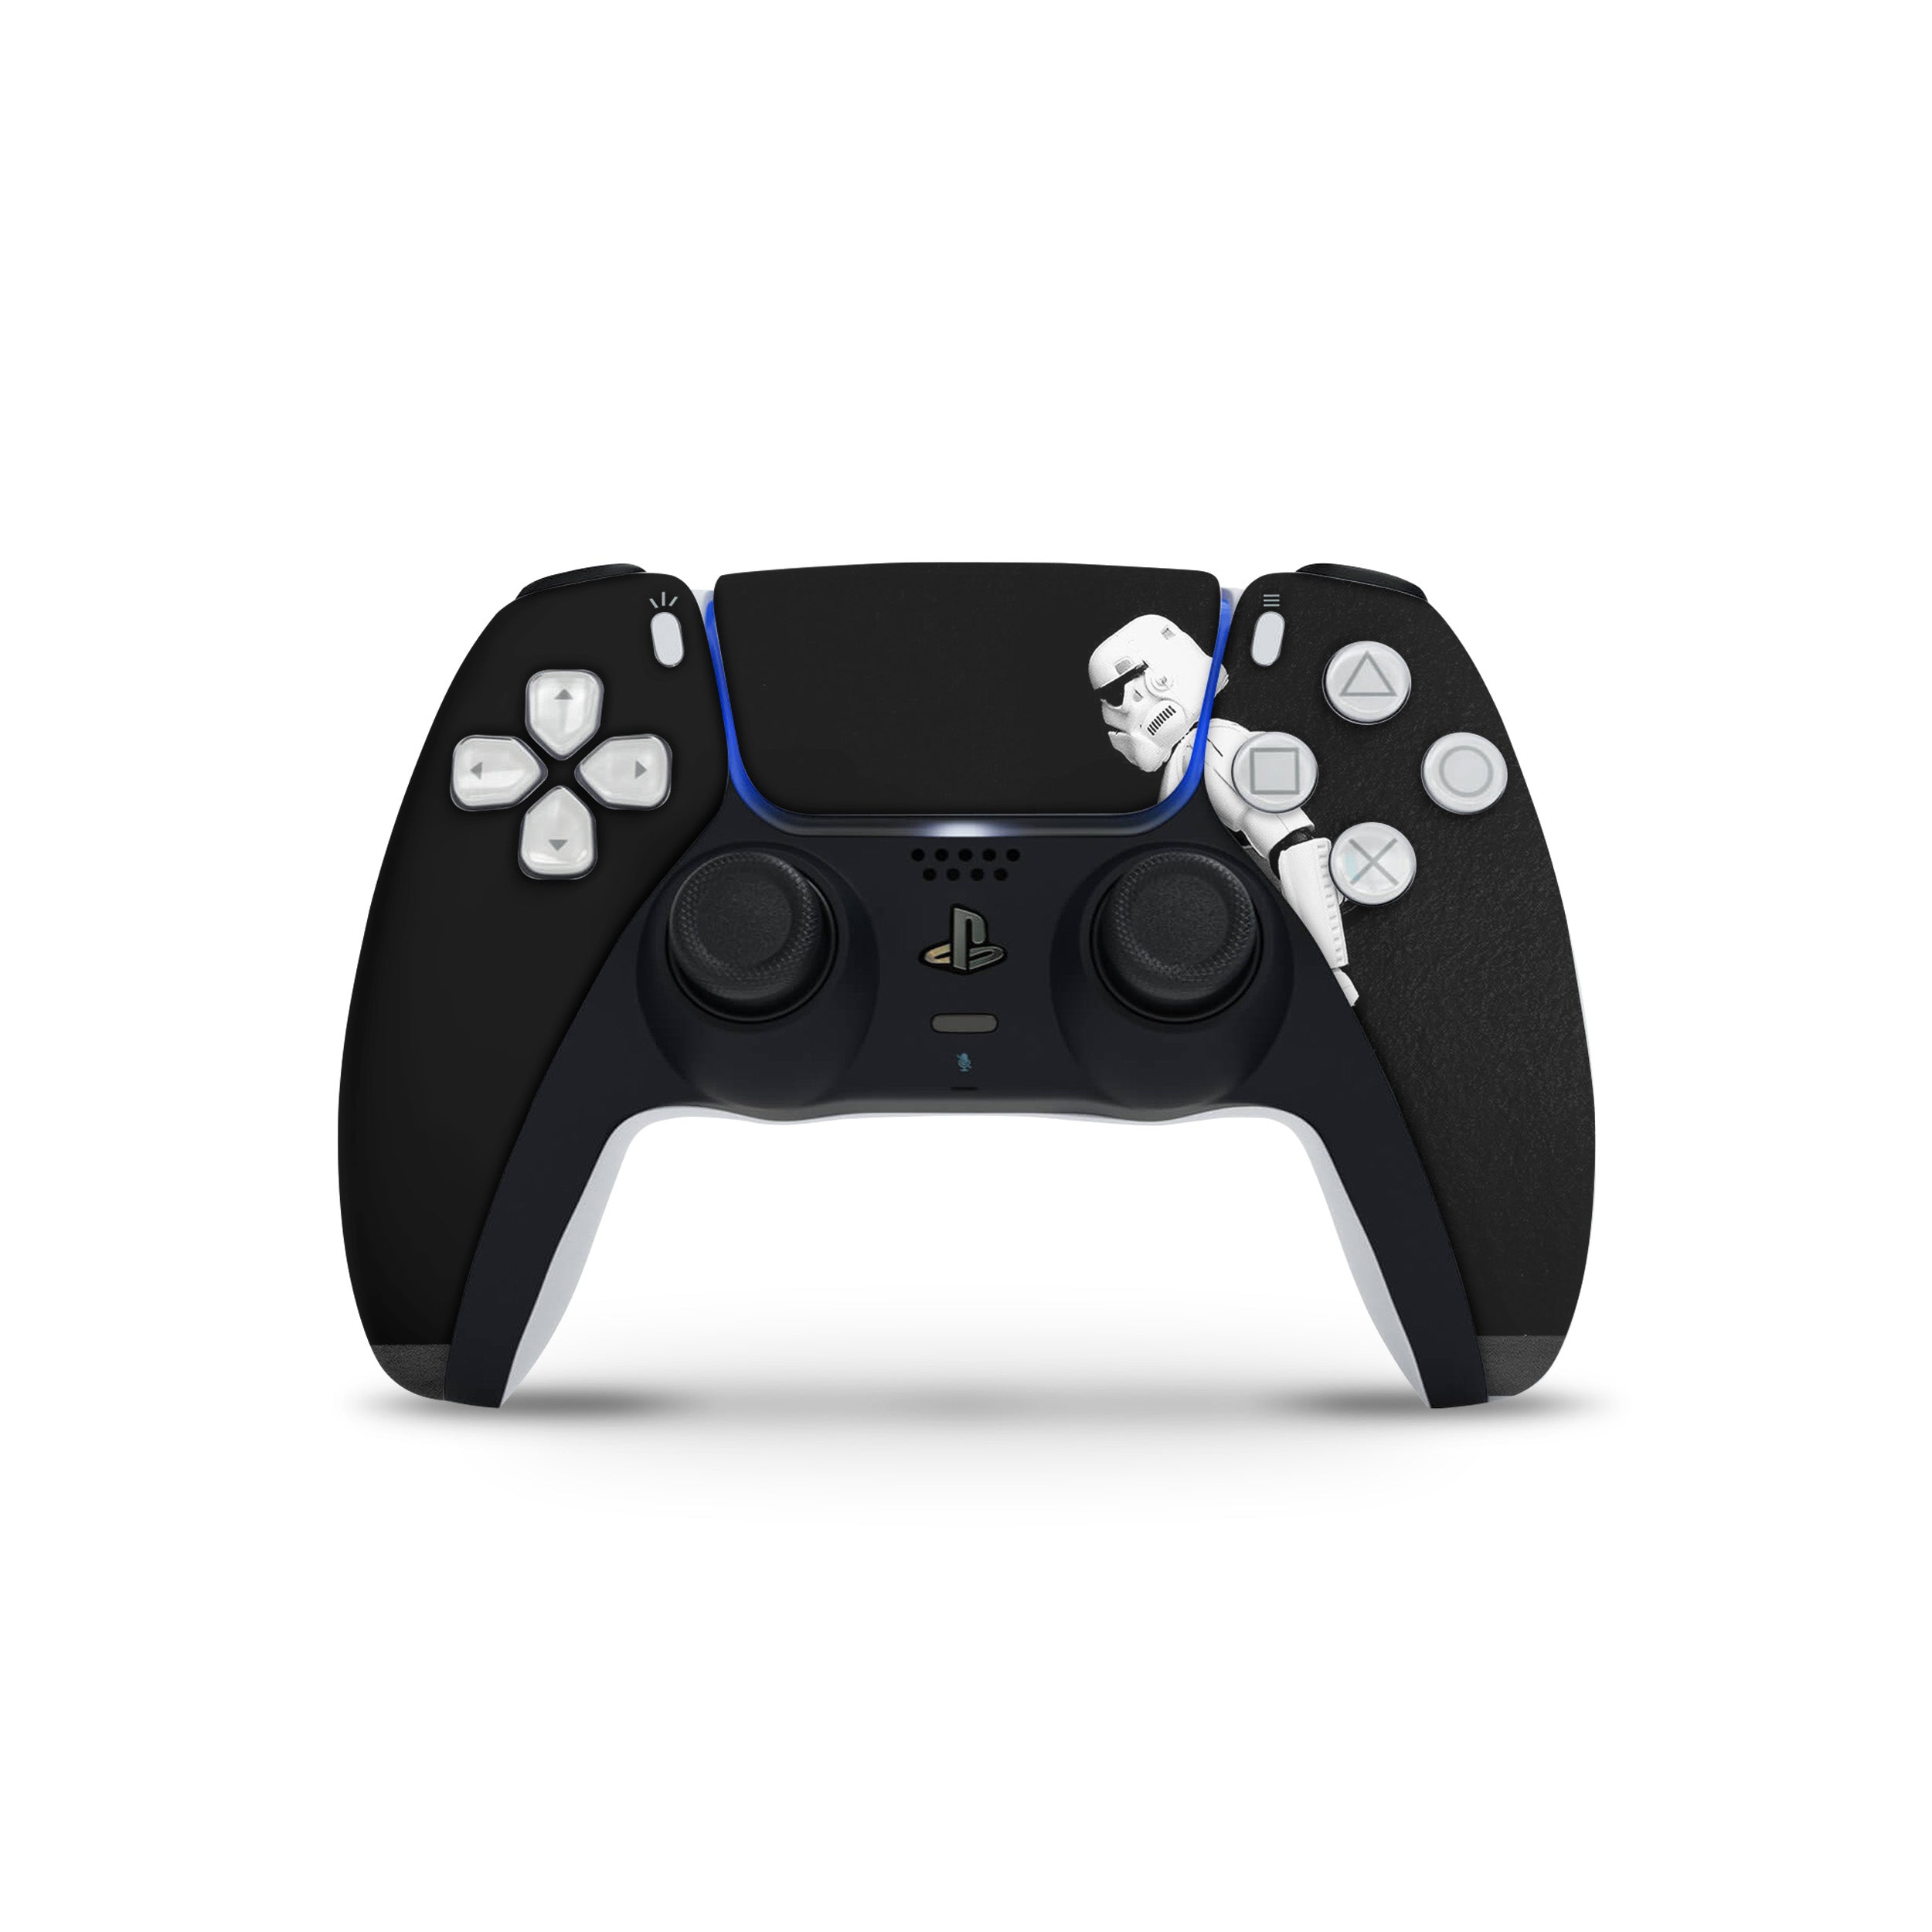 A video game skin featuring a Star Wars Storm Trooper design for the PS5 DualSense Controller.